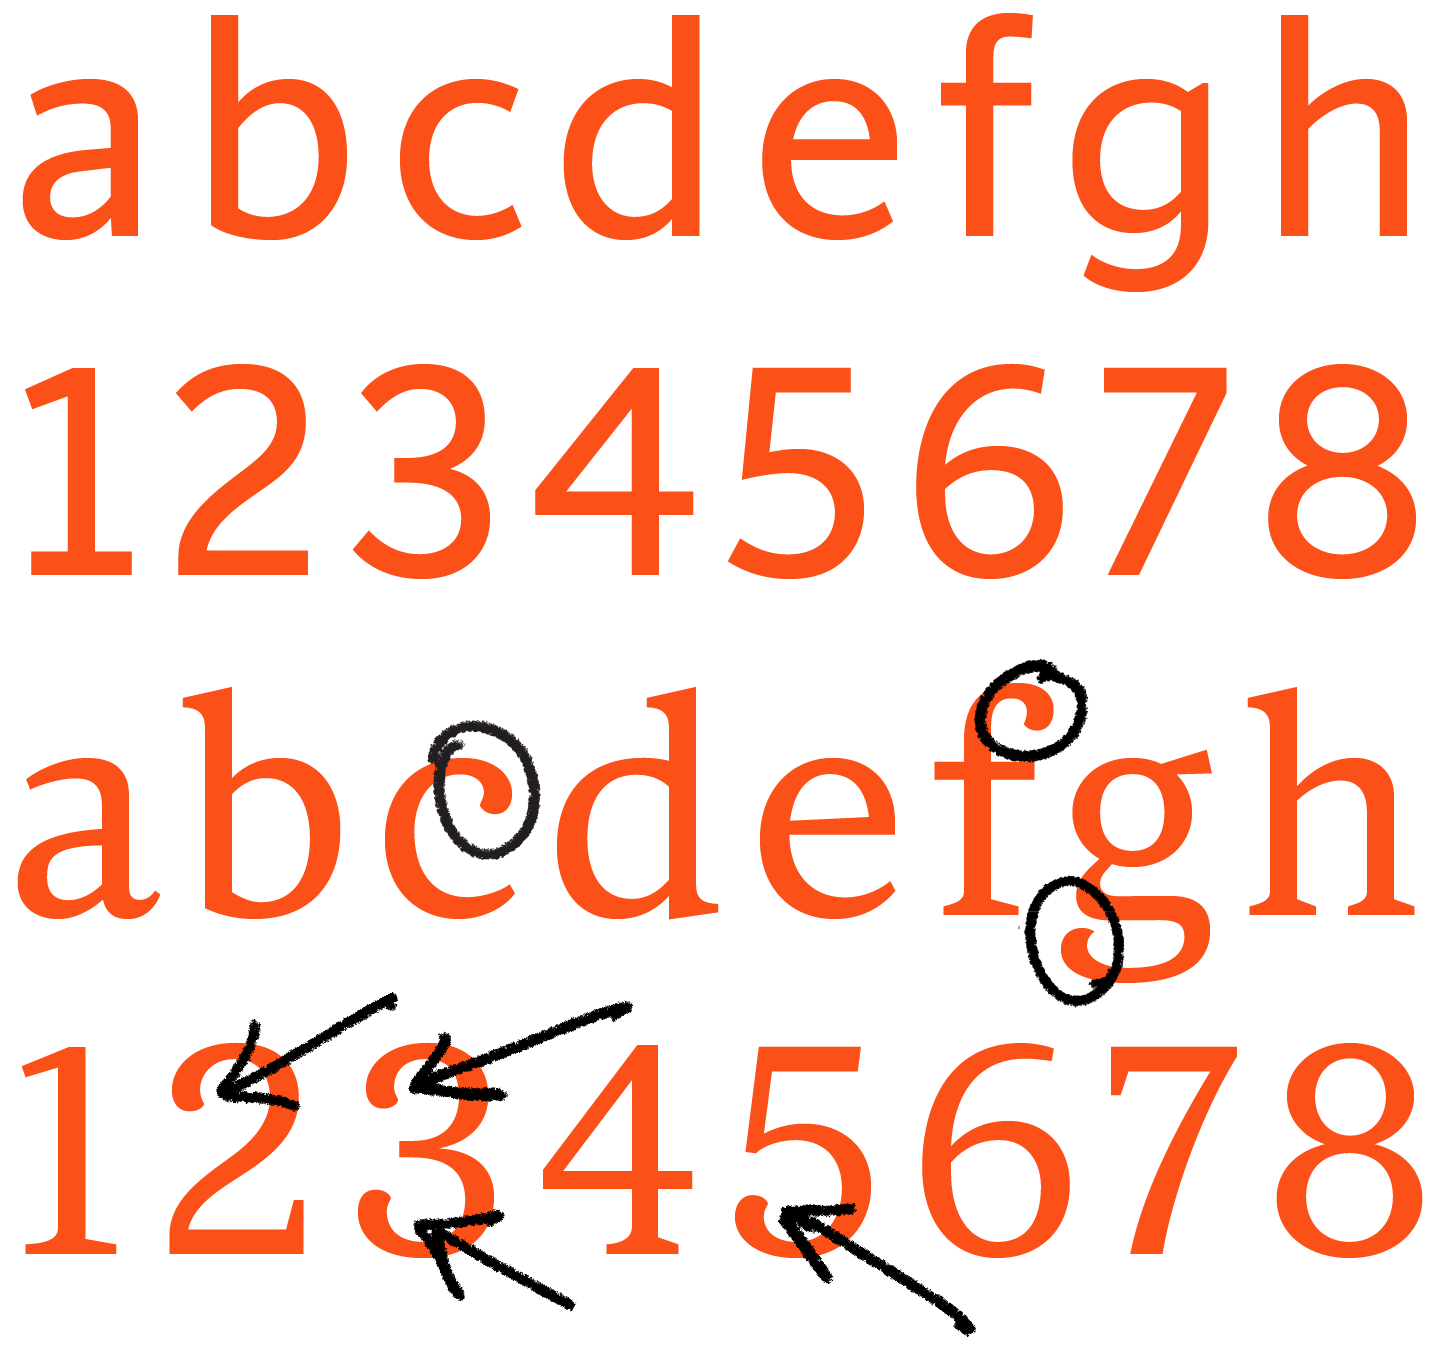 <b class="accent">FIG. 9 — </b> Root Serif alphabetic construction details (circled) emulated in the corresponding figures (arrows).